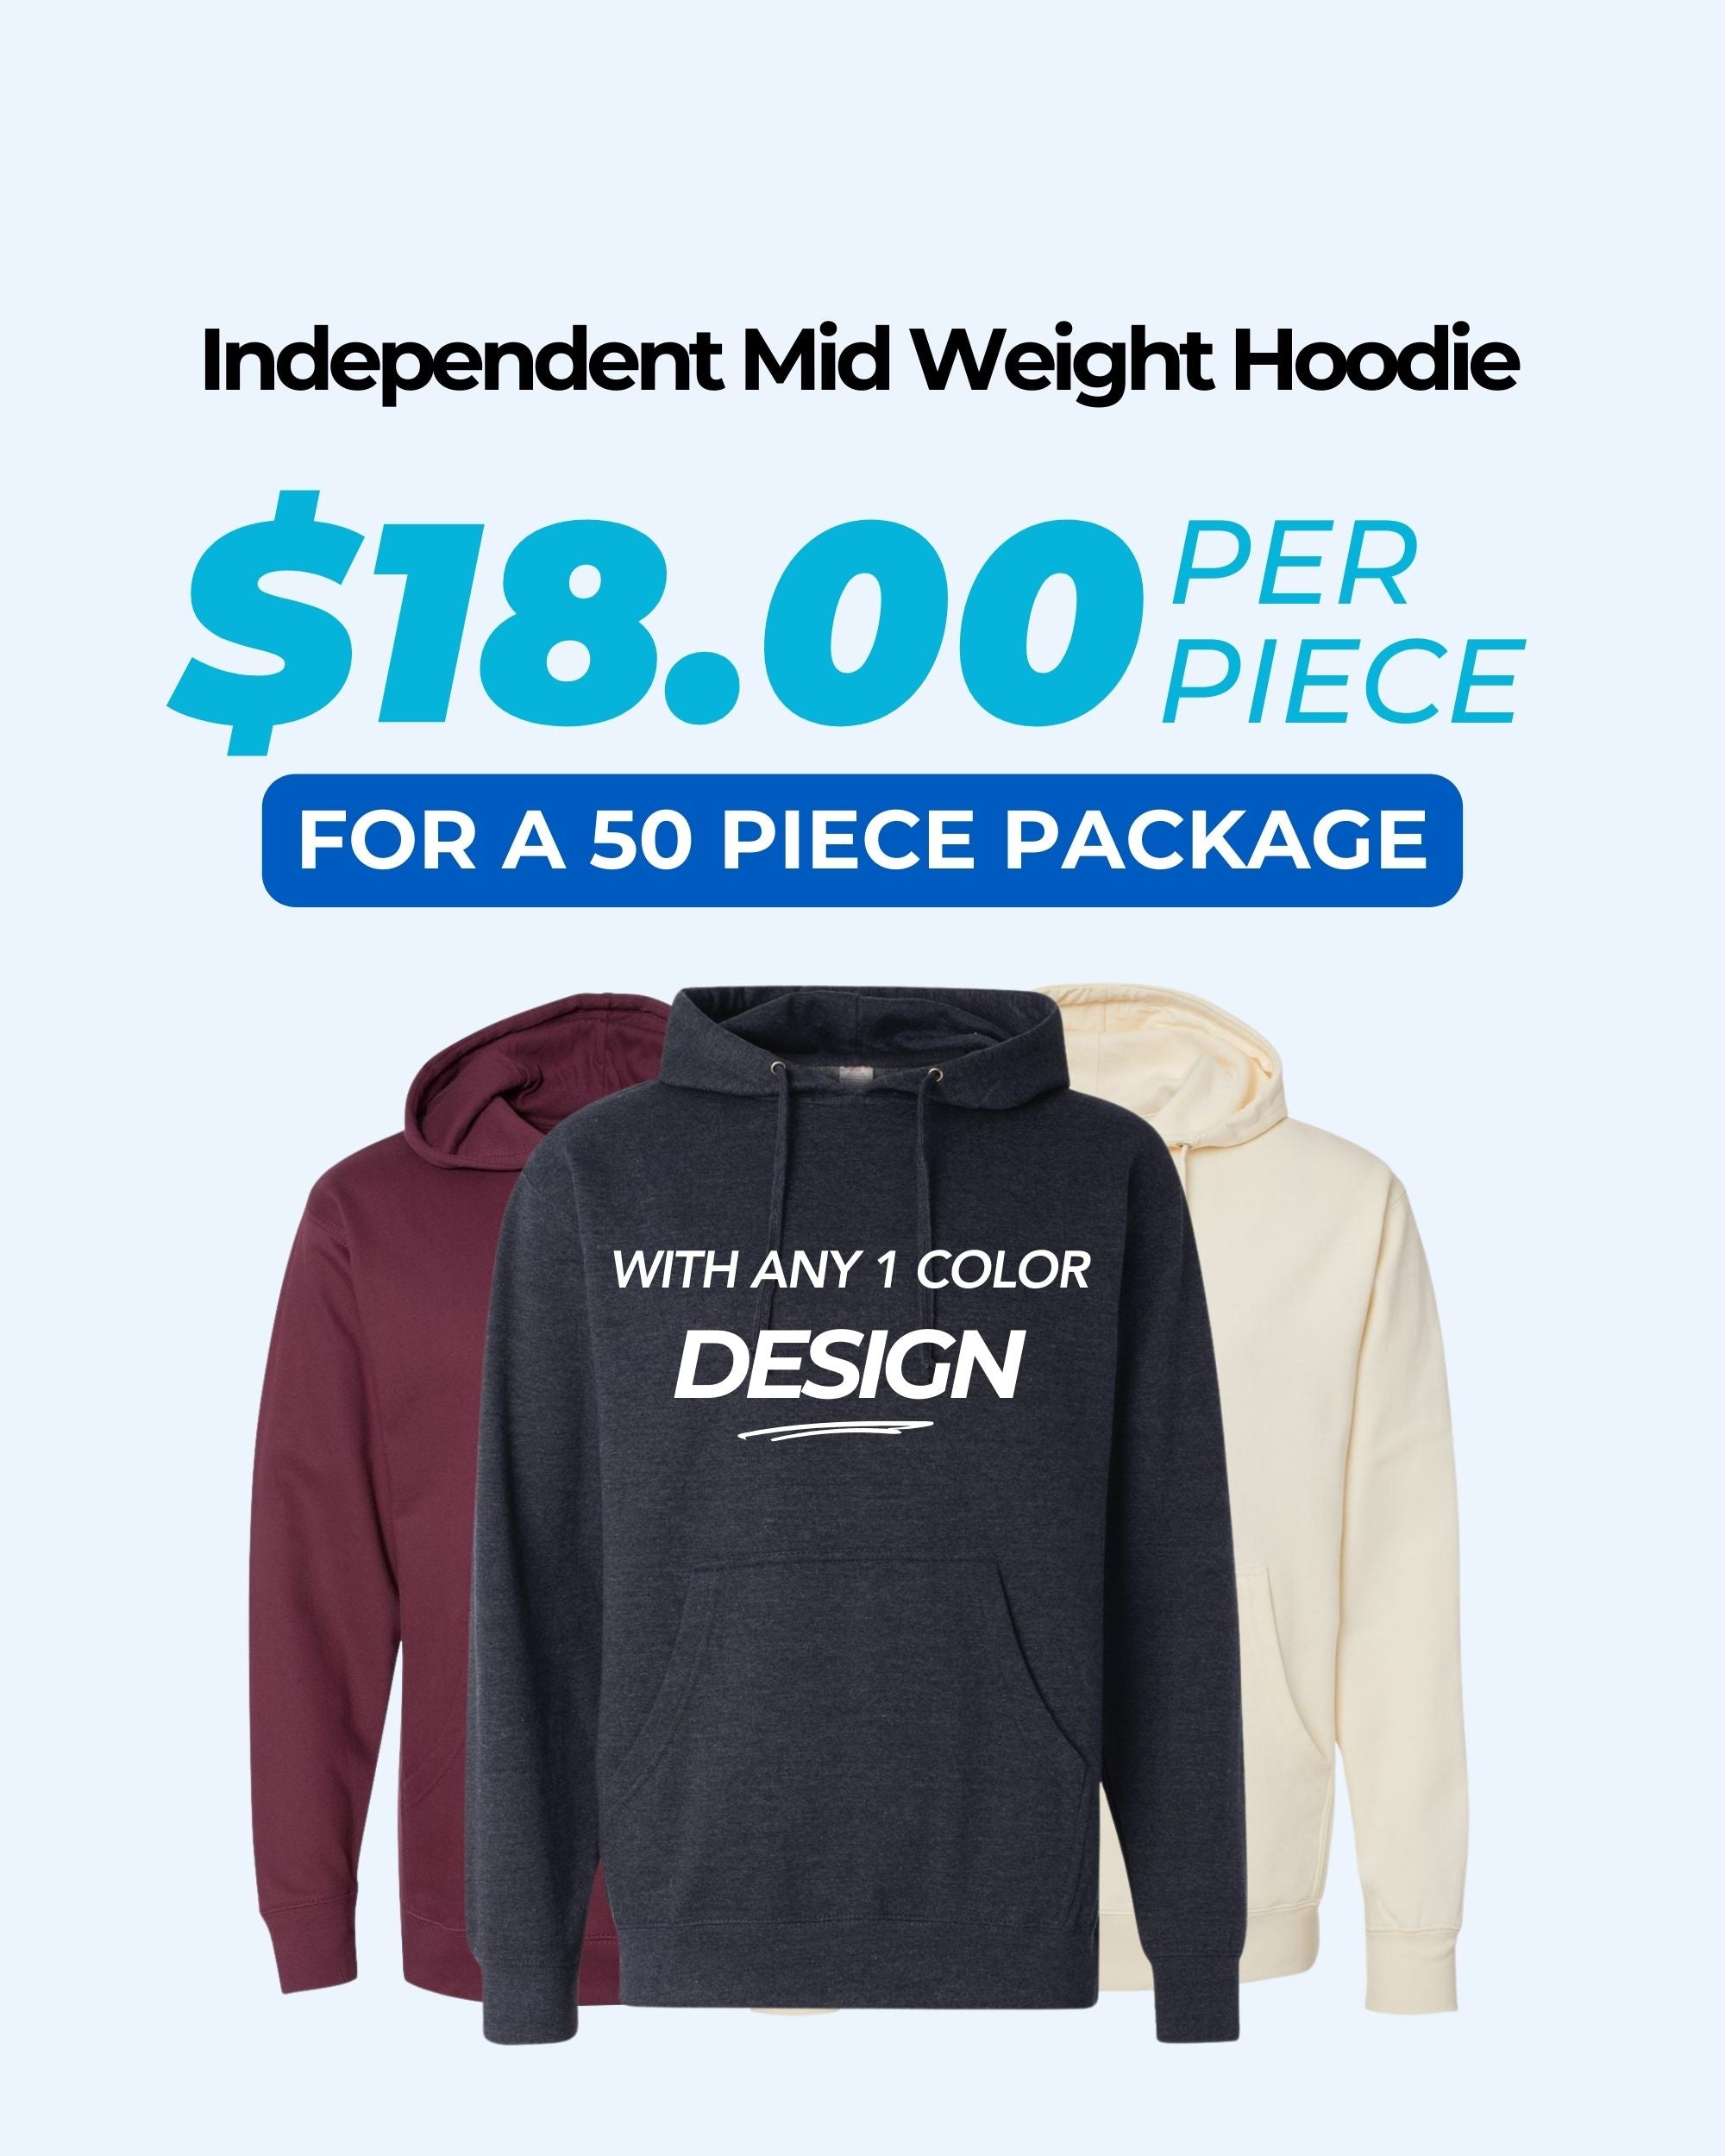 Independent Midweight SS4500 Hoodie Package (50 Pieces)